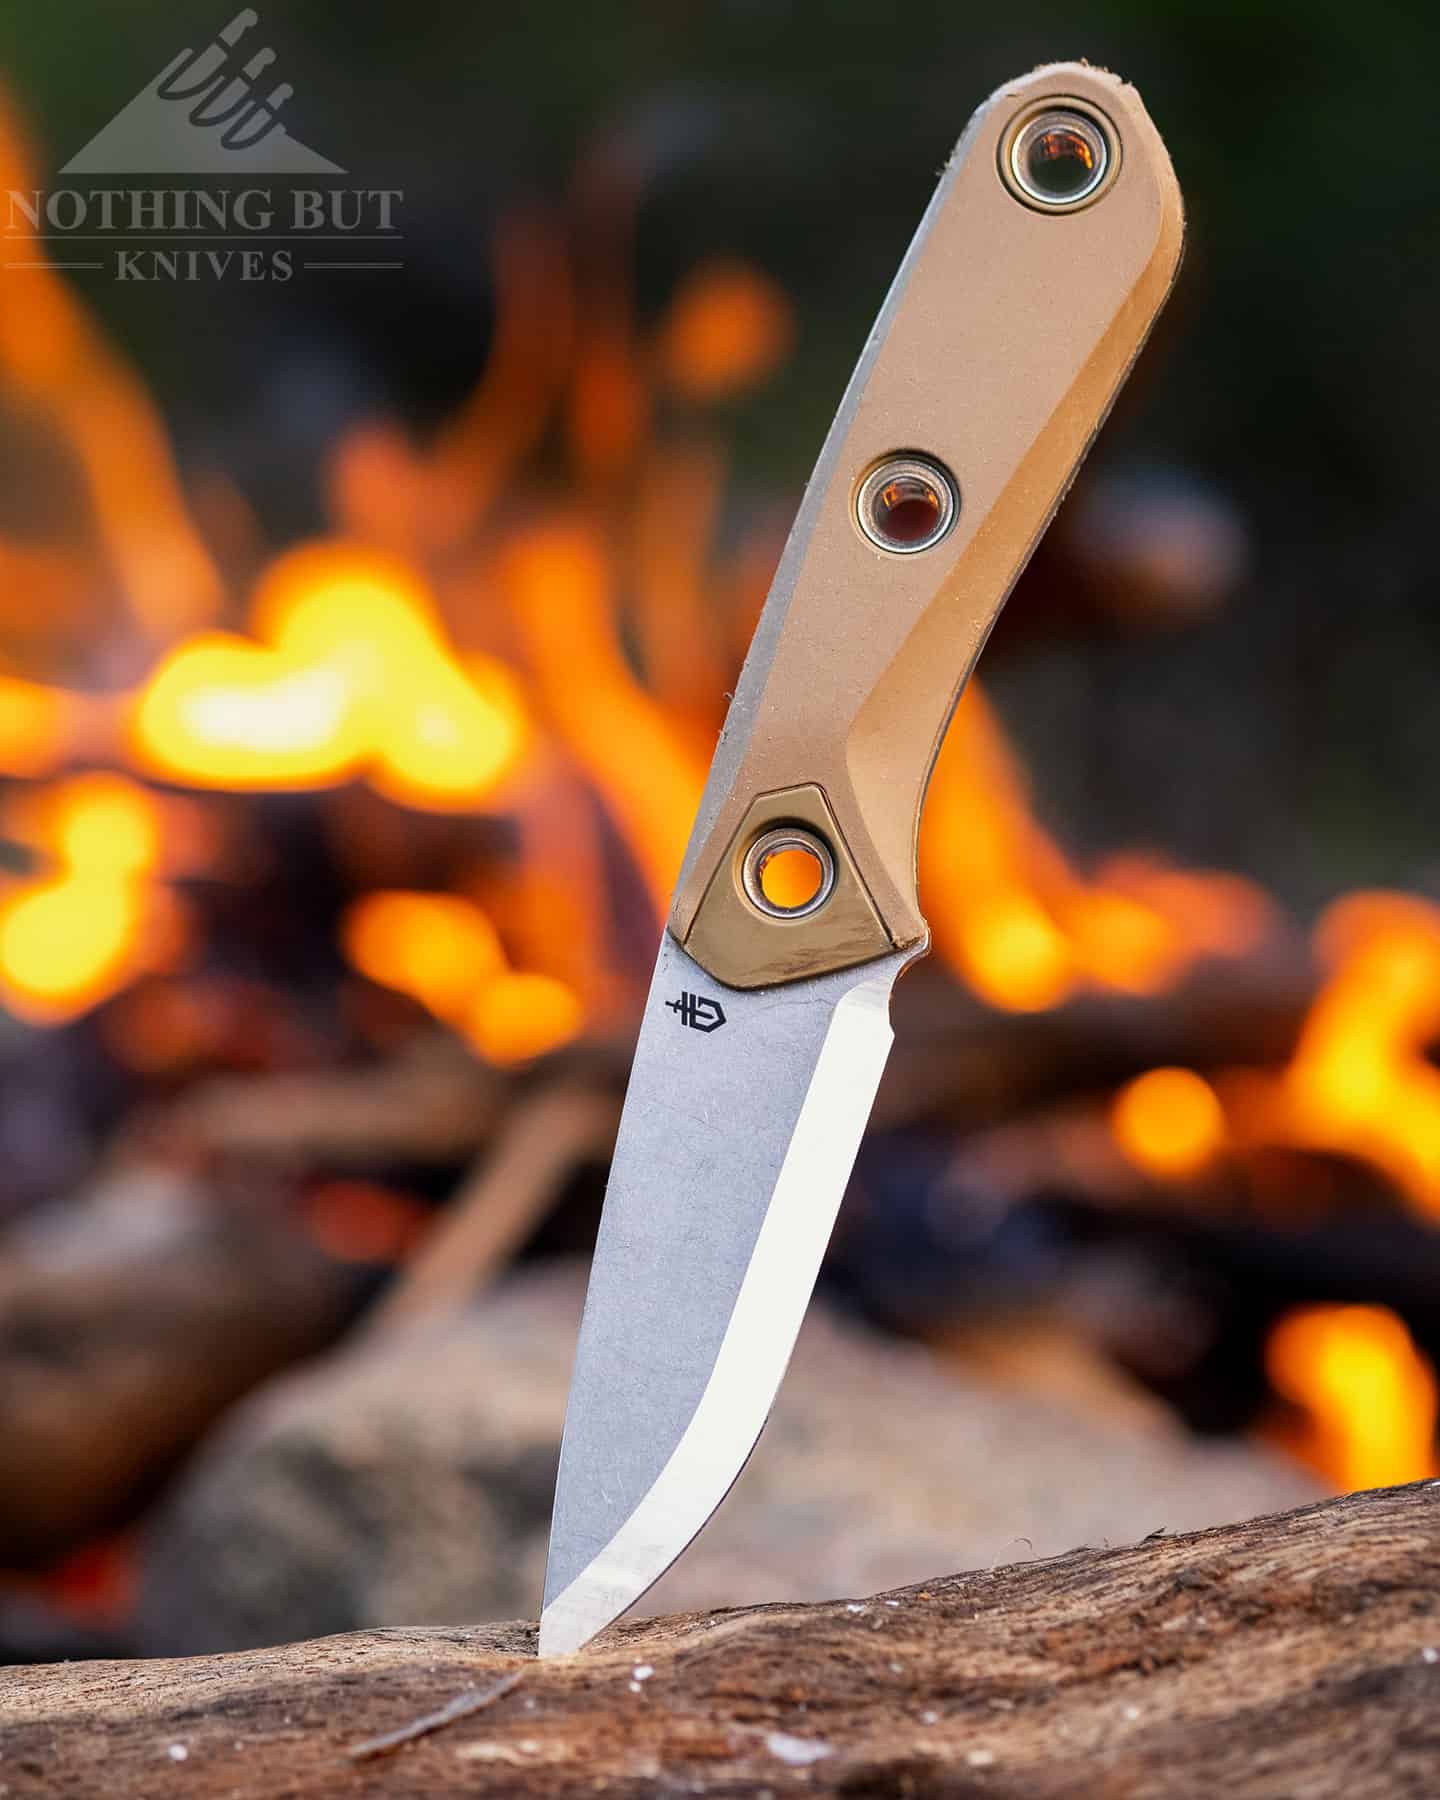 The Gerber Principle has a short blade with a scandi grind that carves up wood and throws spark like a champ.